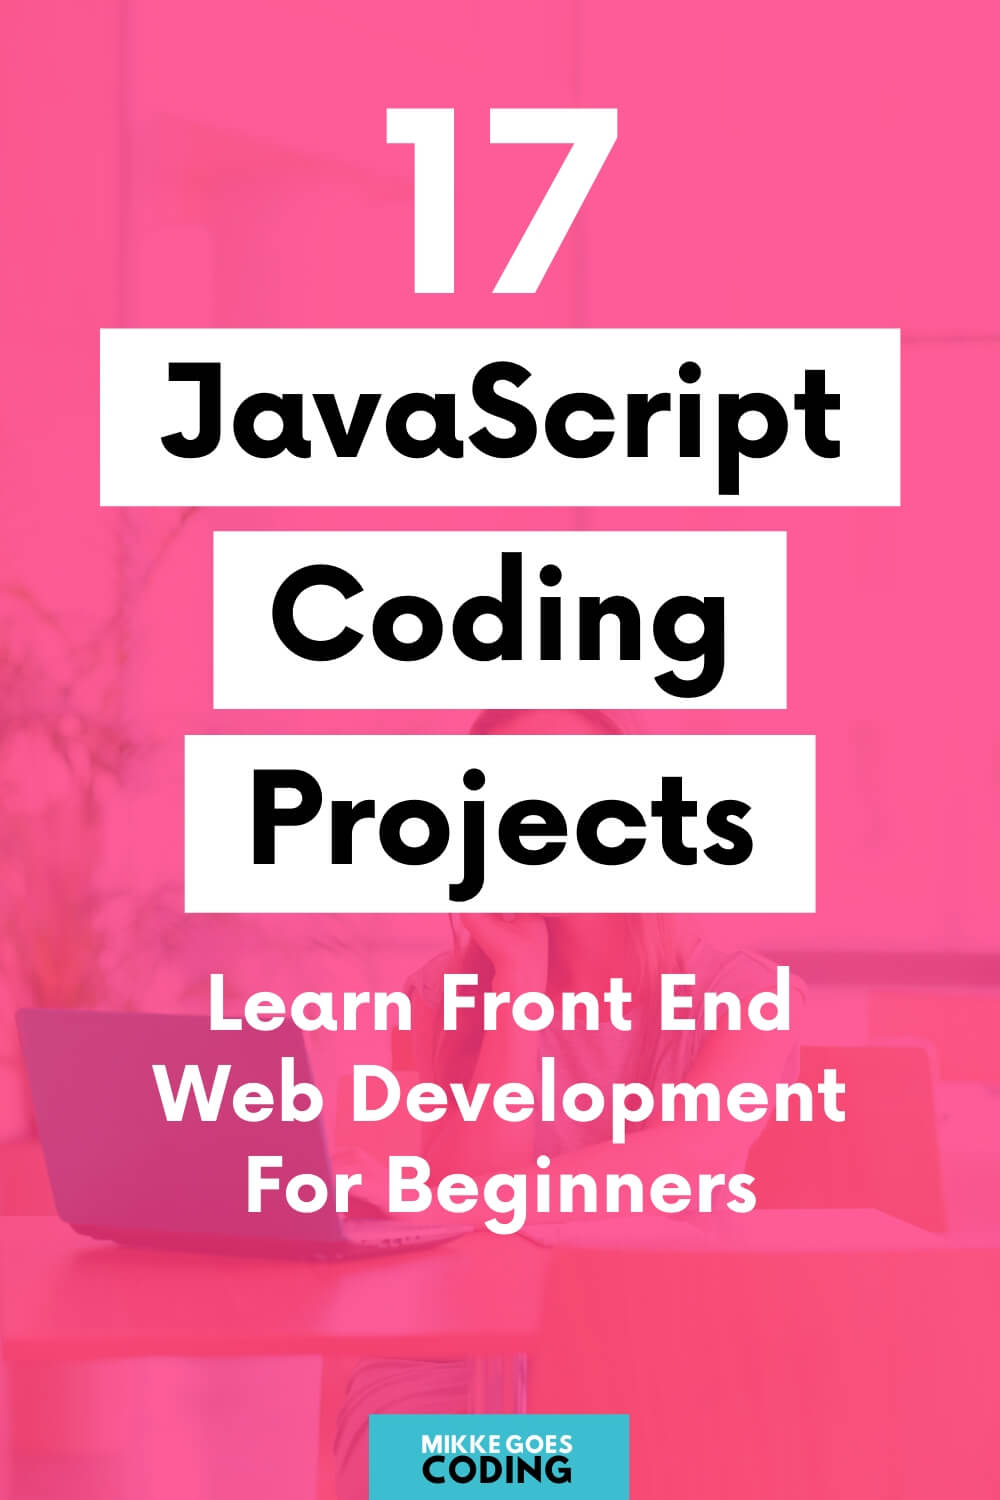 22 JavaScript Projects You Can Build to Perfect Your Coding Skills